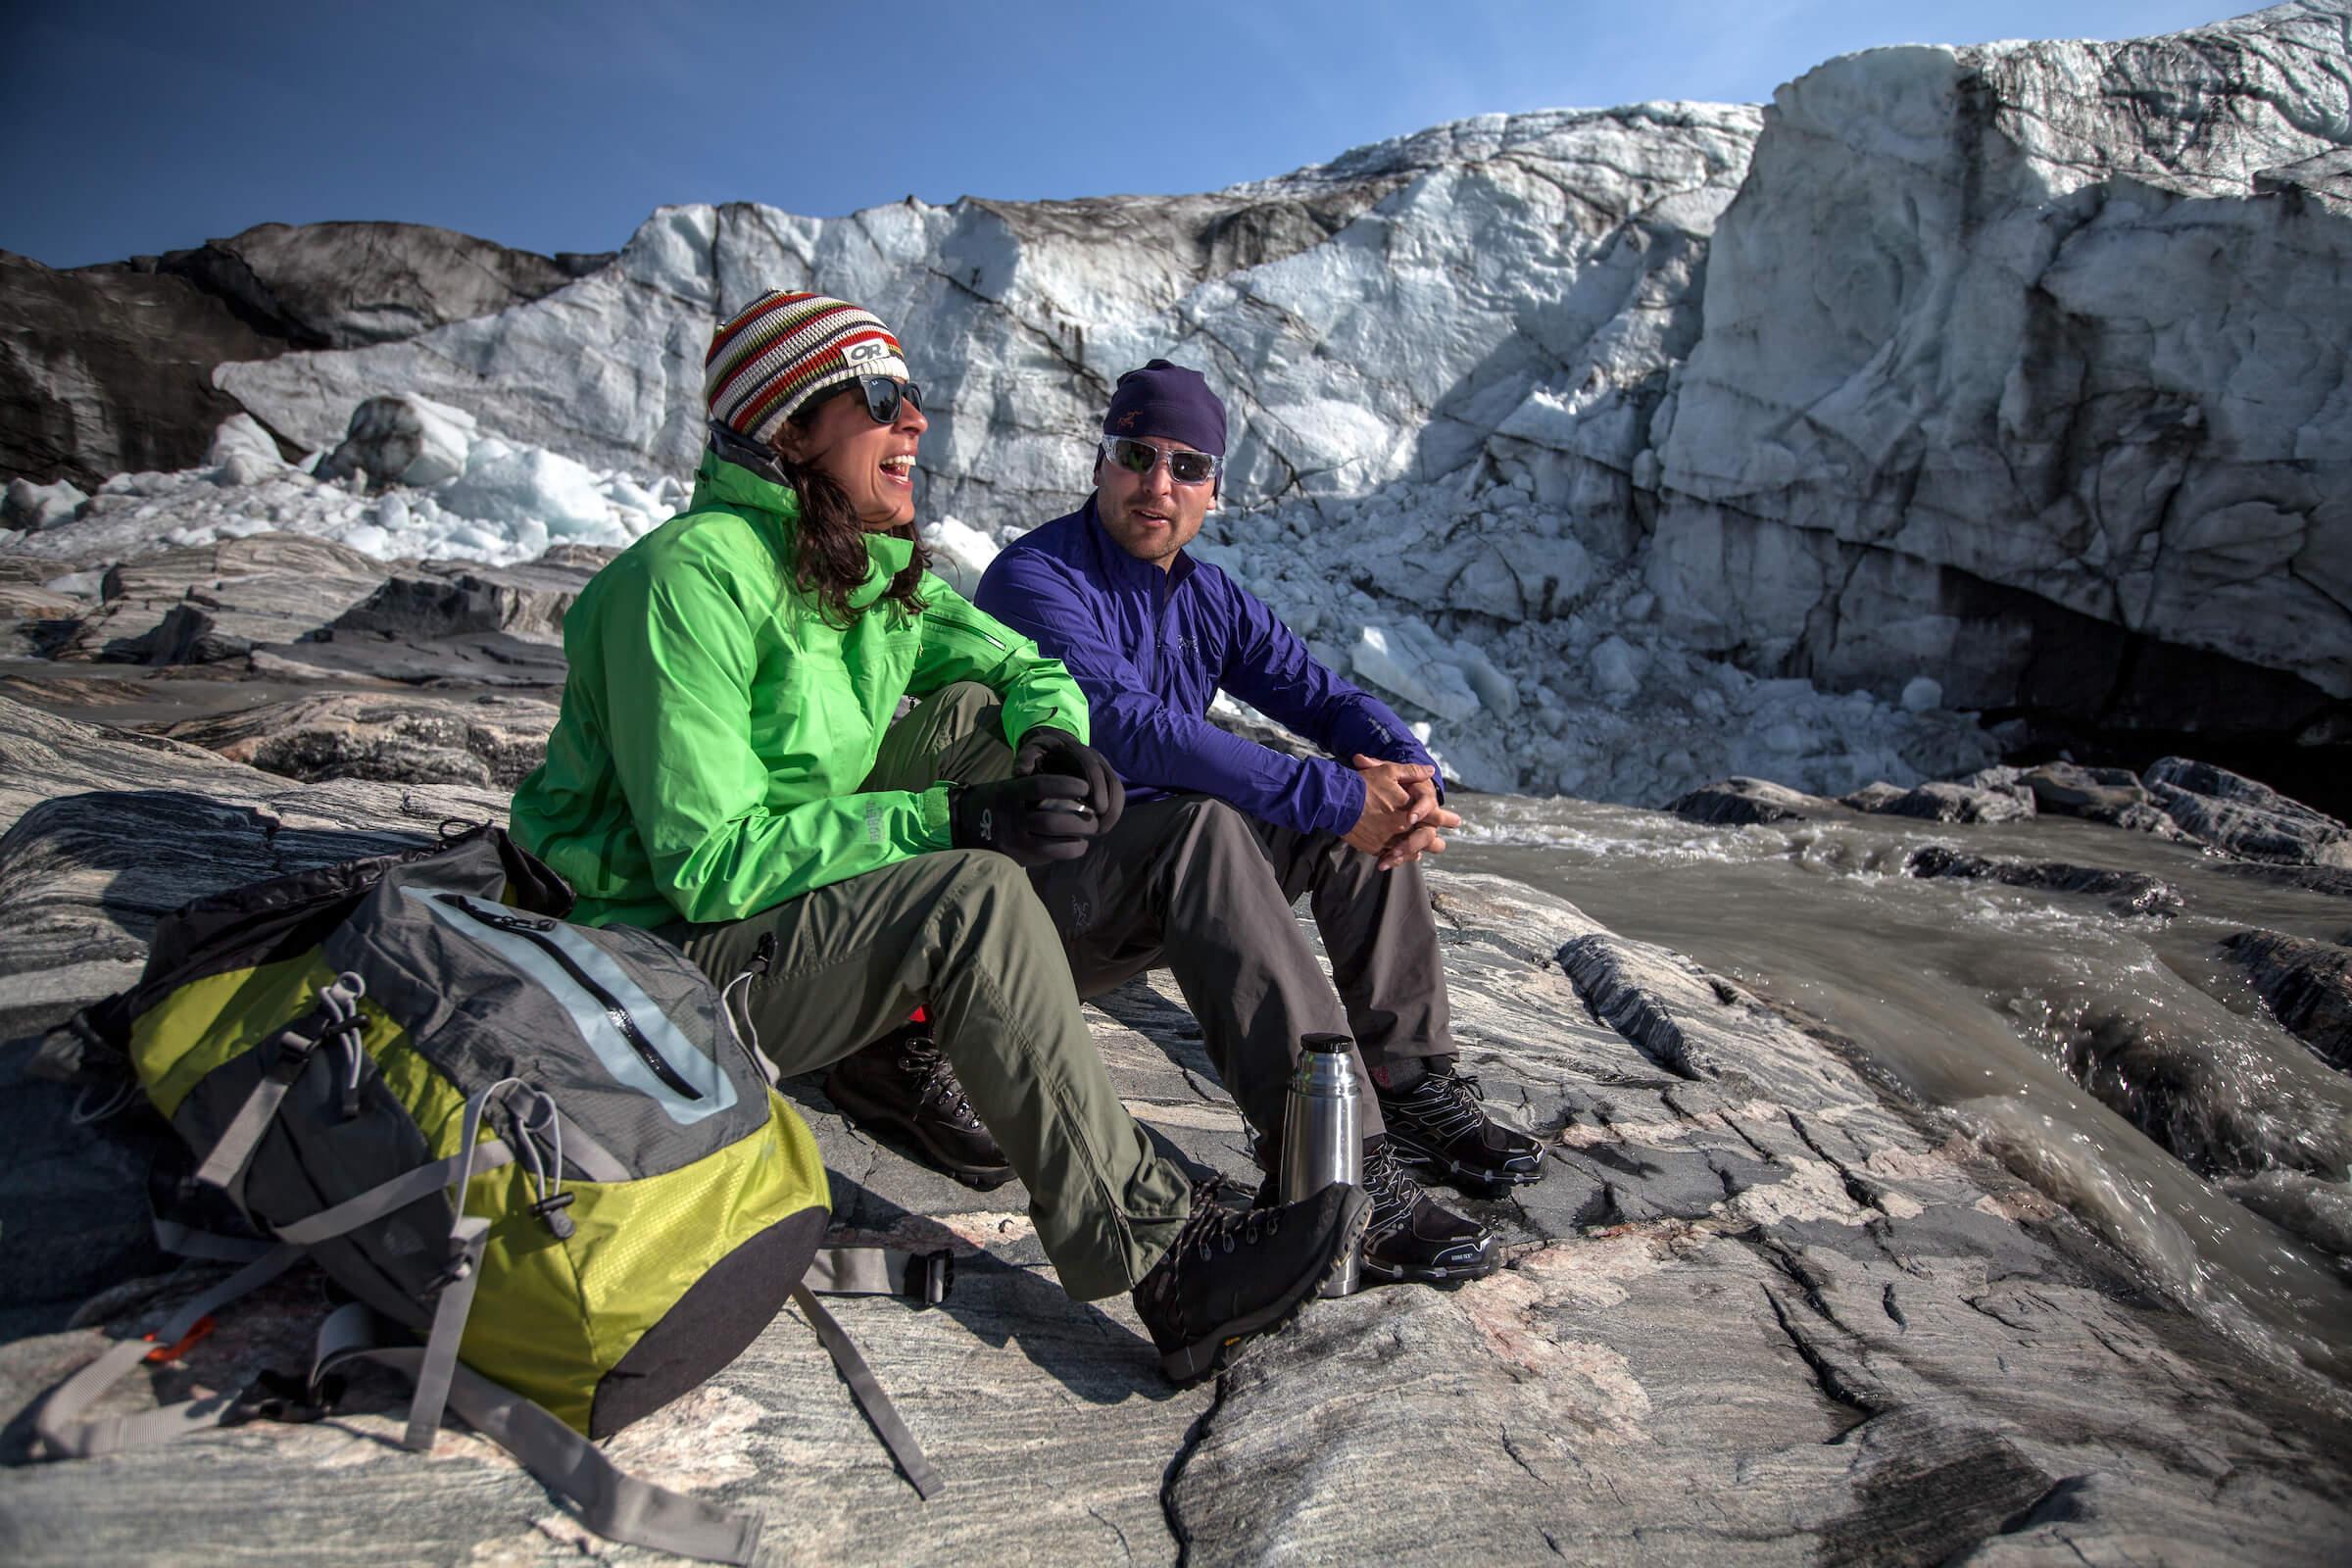 Two hikers enjoying a day in the sun by the Russell Glacier near Kangerlussuaq in Greenland. Photo by Mads Pihl